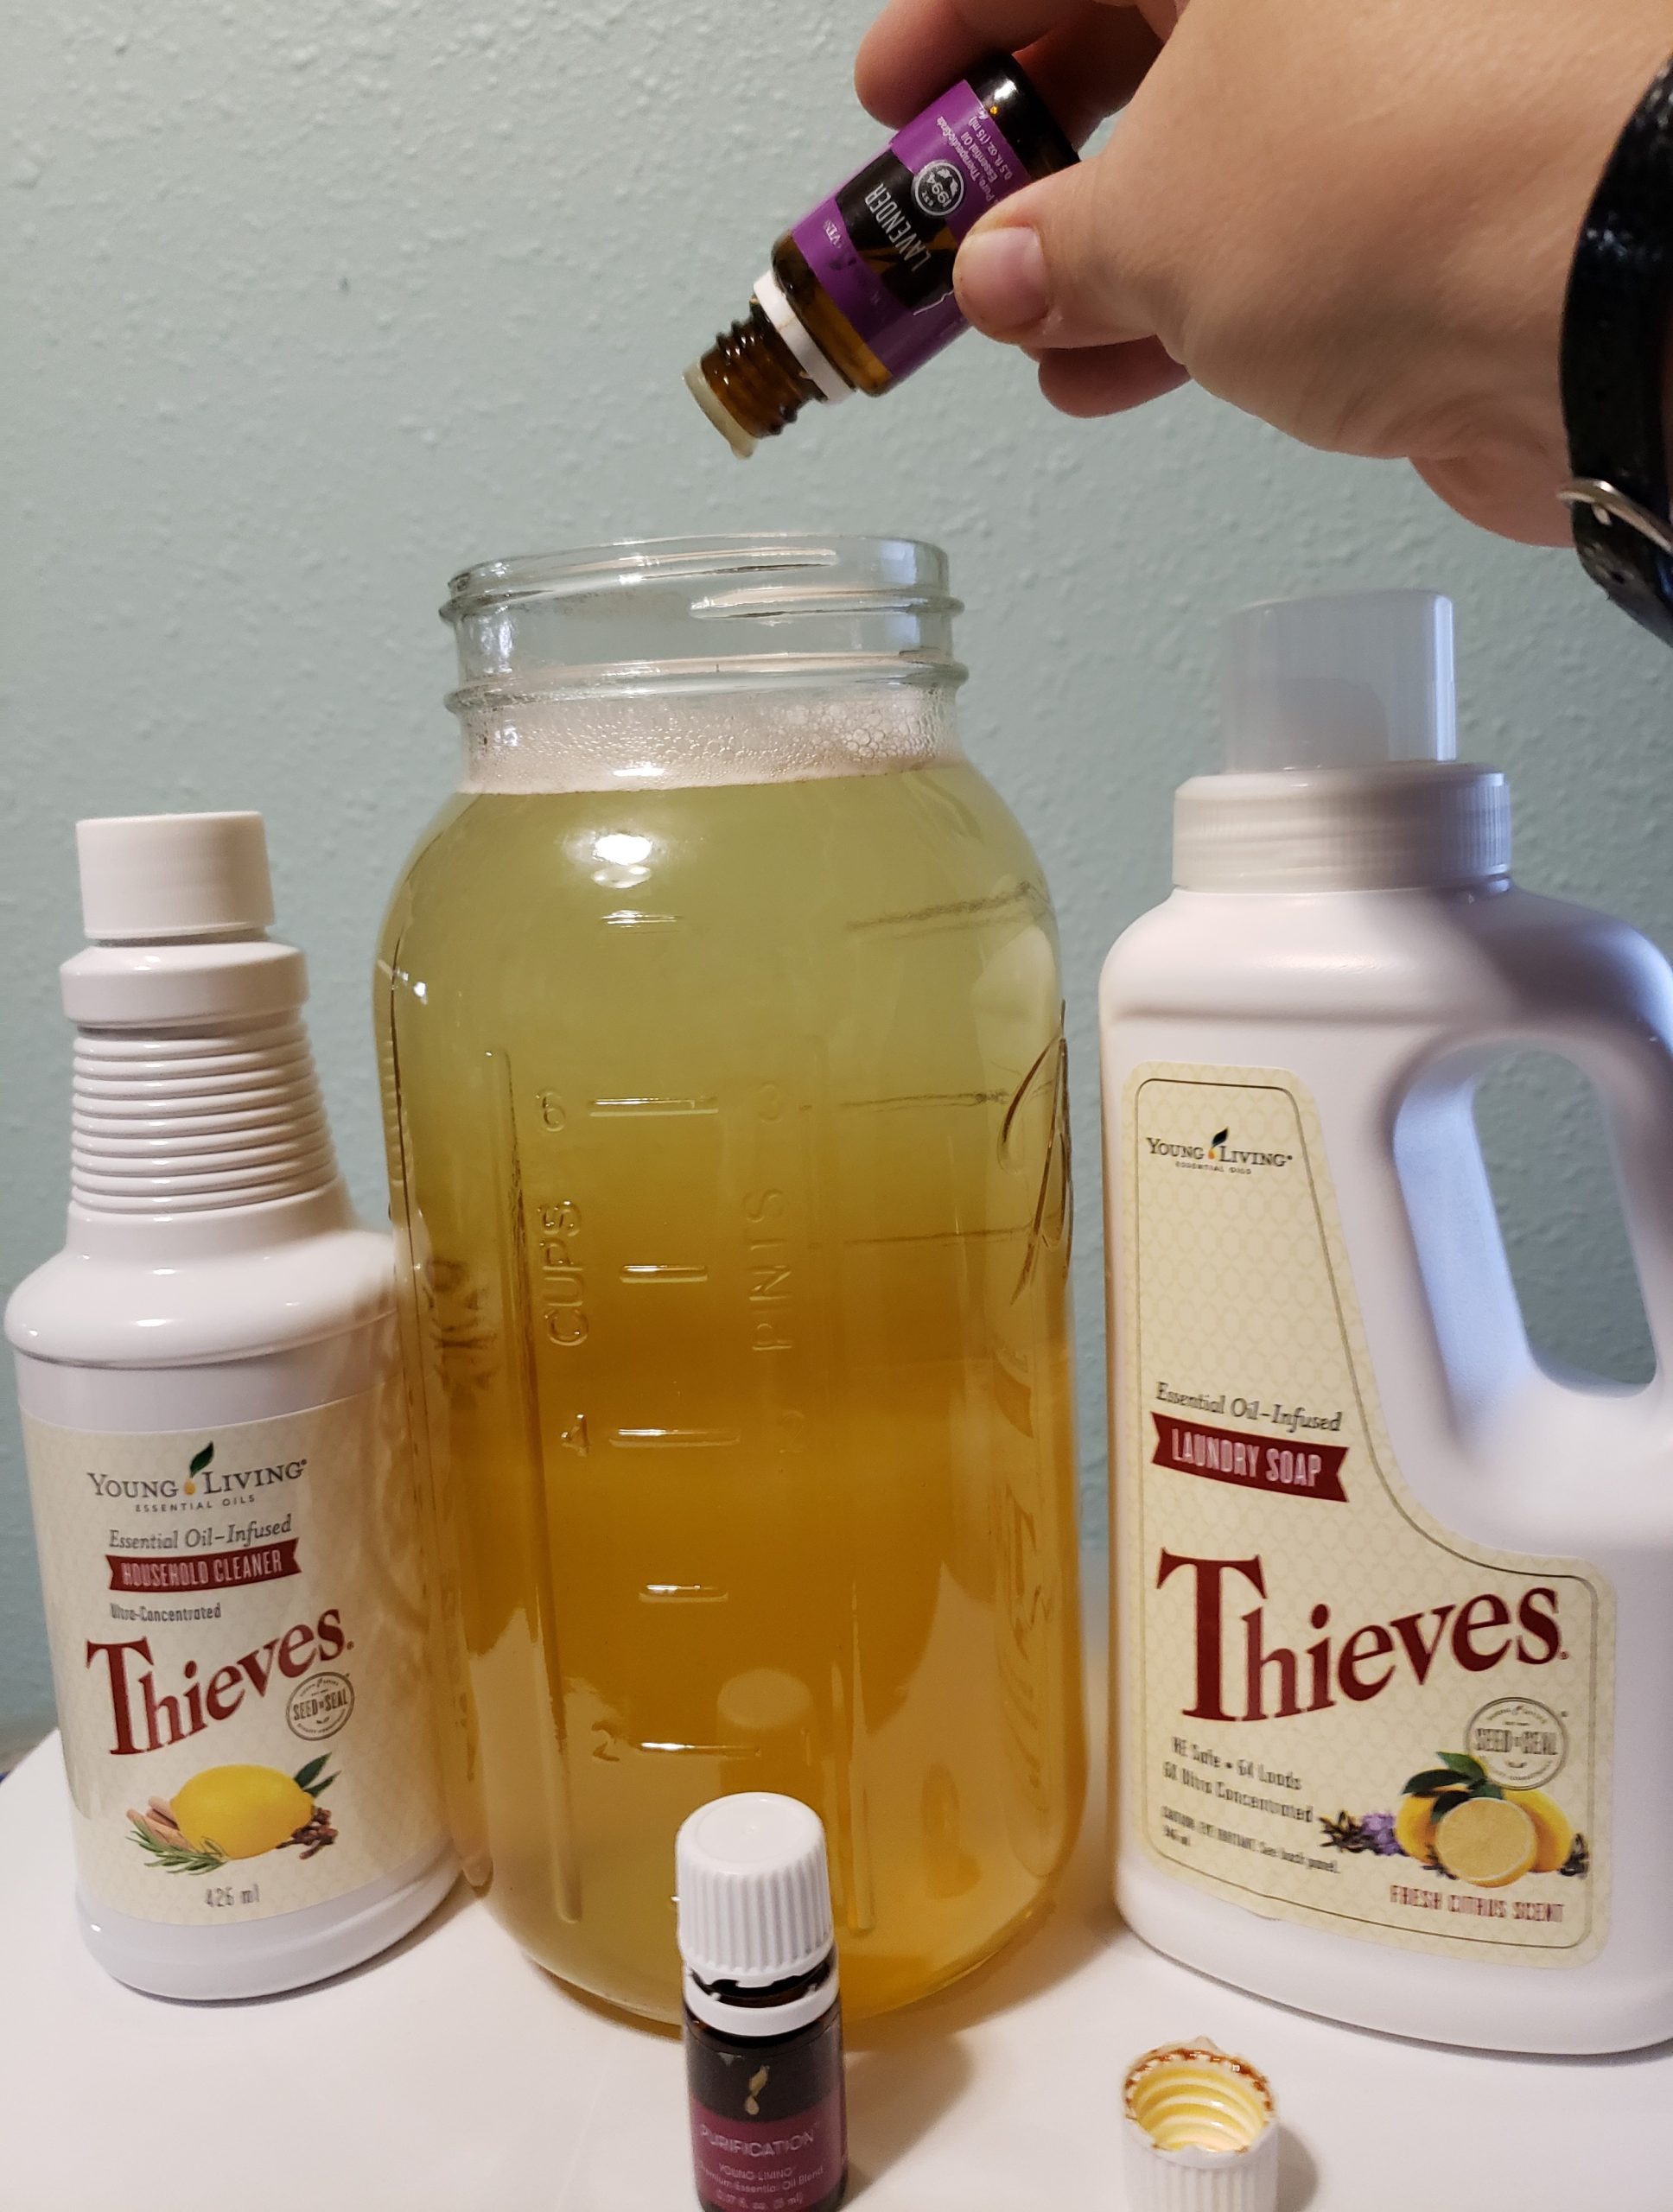 young living lavender essential oil being carefully dripped into a large glass jar of amber colored fluid next to thieves household cleaner laundry soap purfication blend